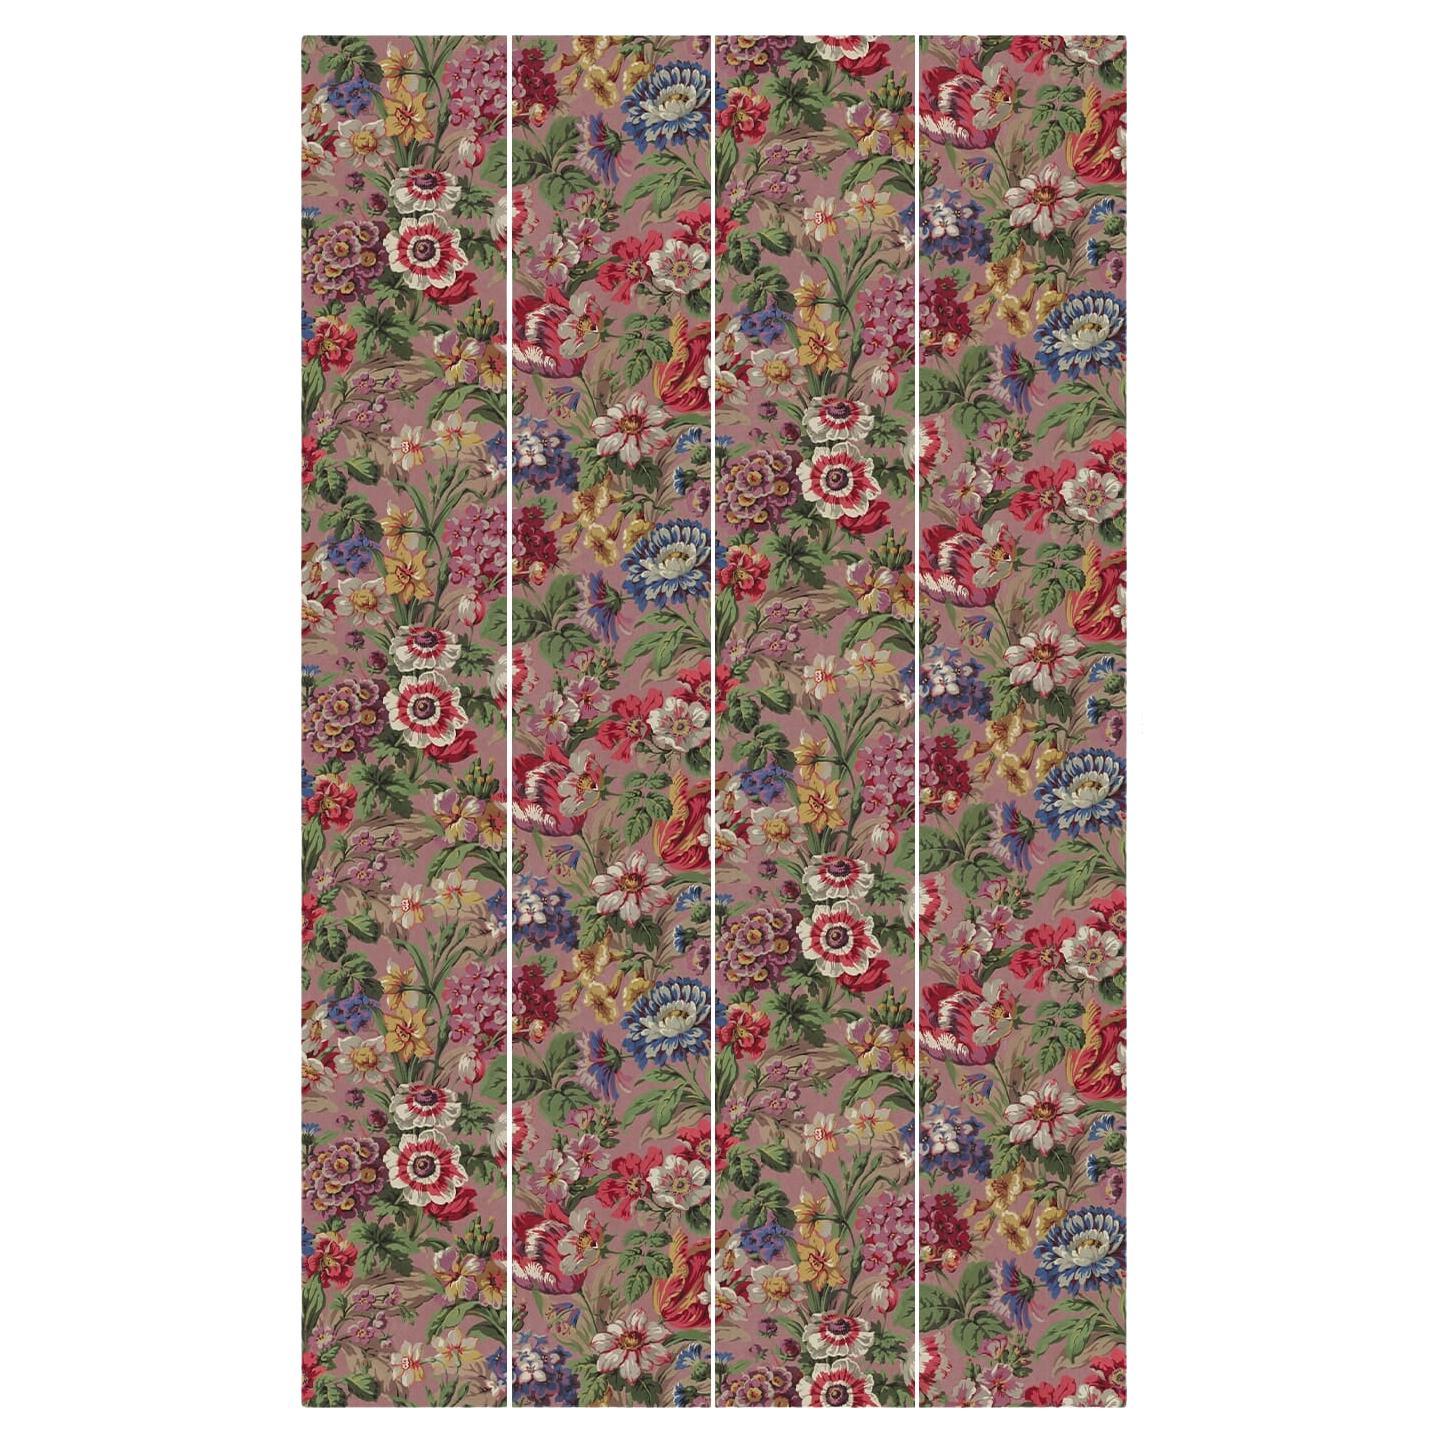 Chintzy but chic, this print is definitely not your granny’s florals. A rebellious riot of blooms, this floral fantastic wallpaper features anemones, tulips and primroses against a backdrop of ‘Hosta’, an earthy terracotta pink.

Our wallpaper is